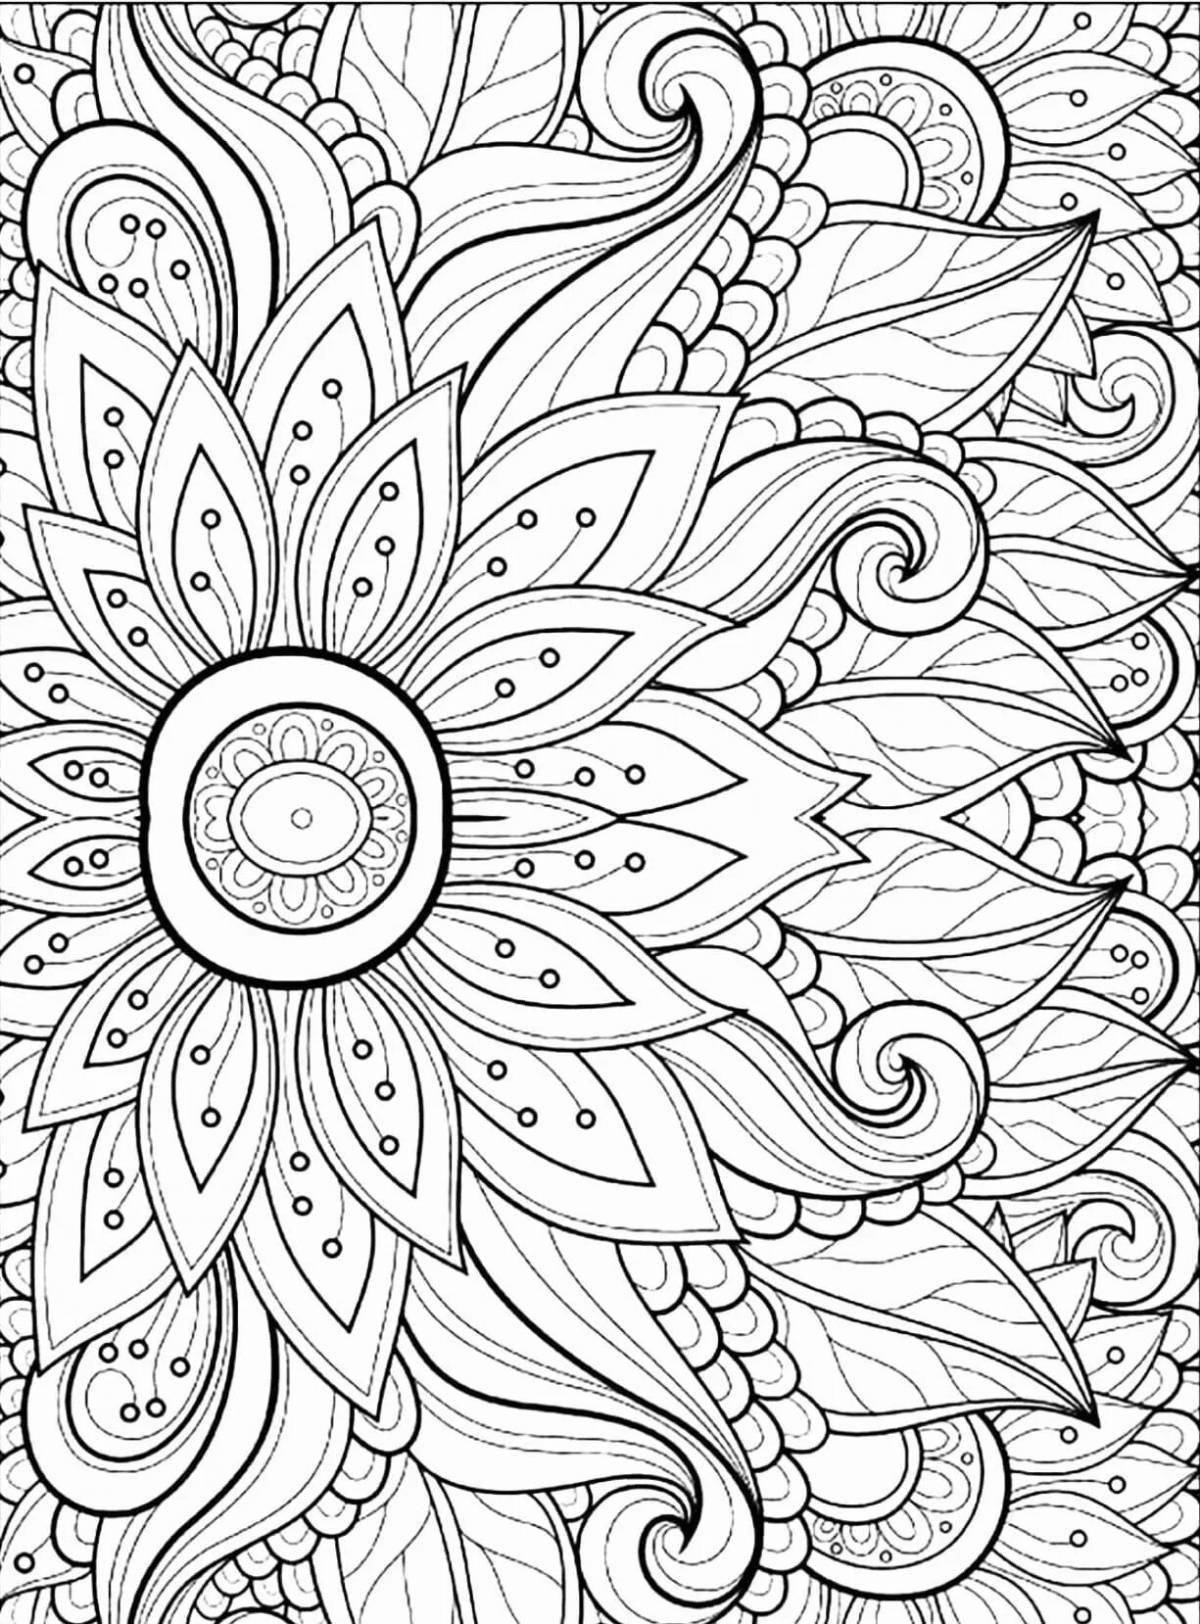 Blissful adult coloring book